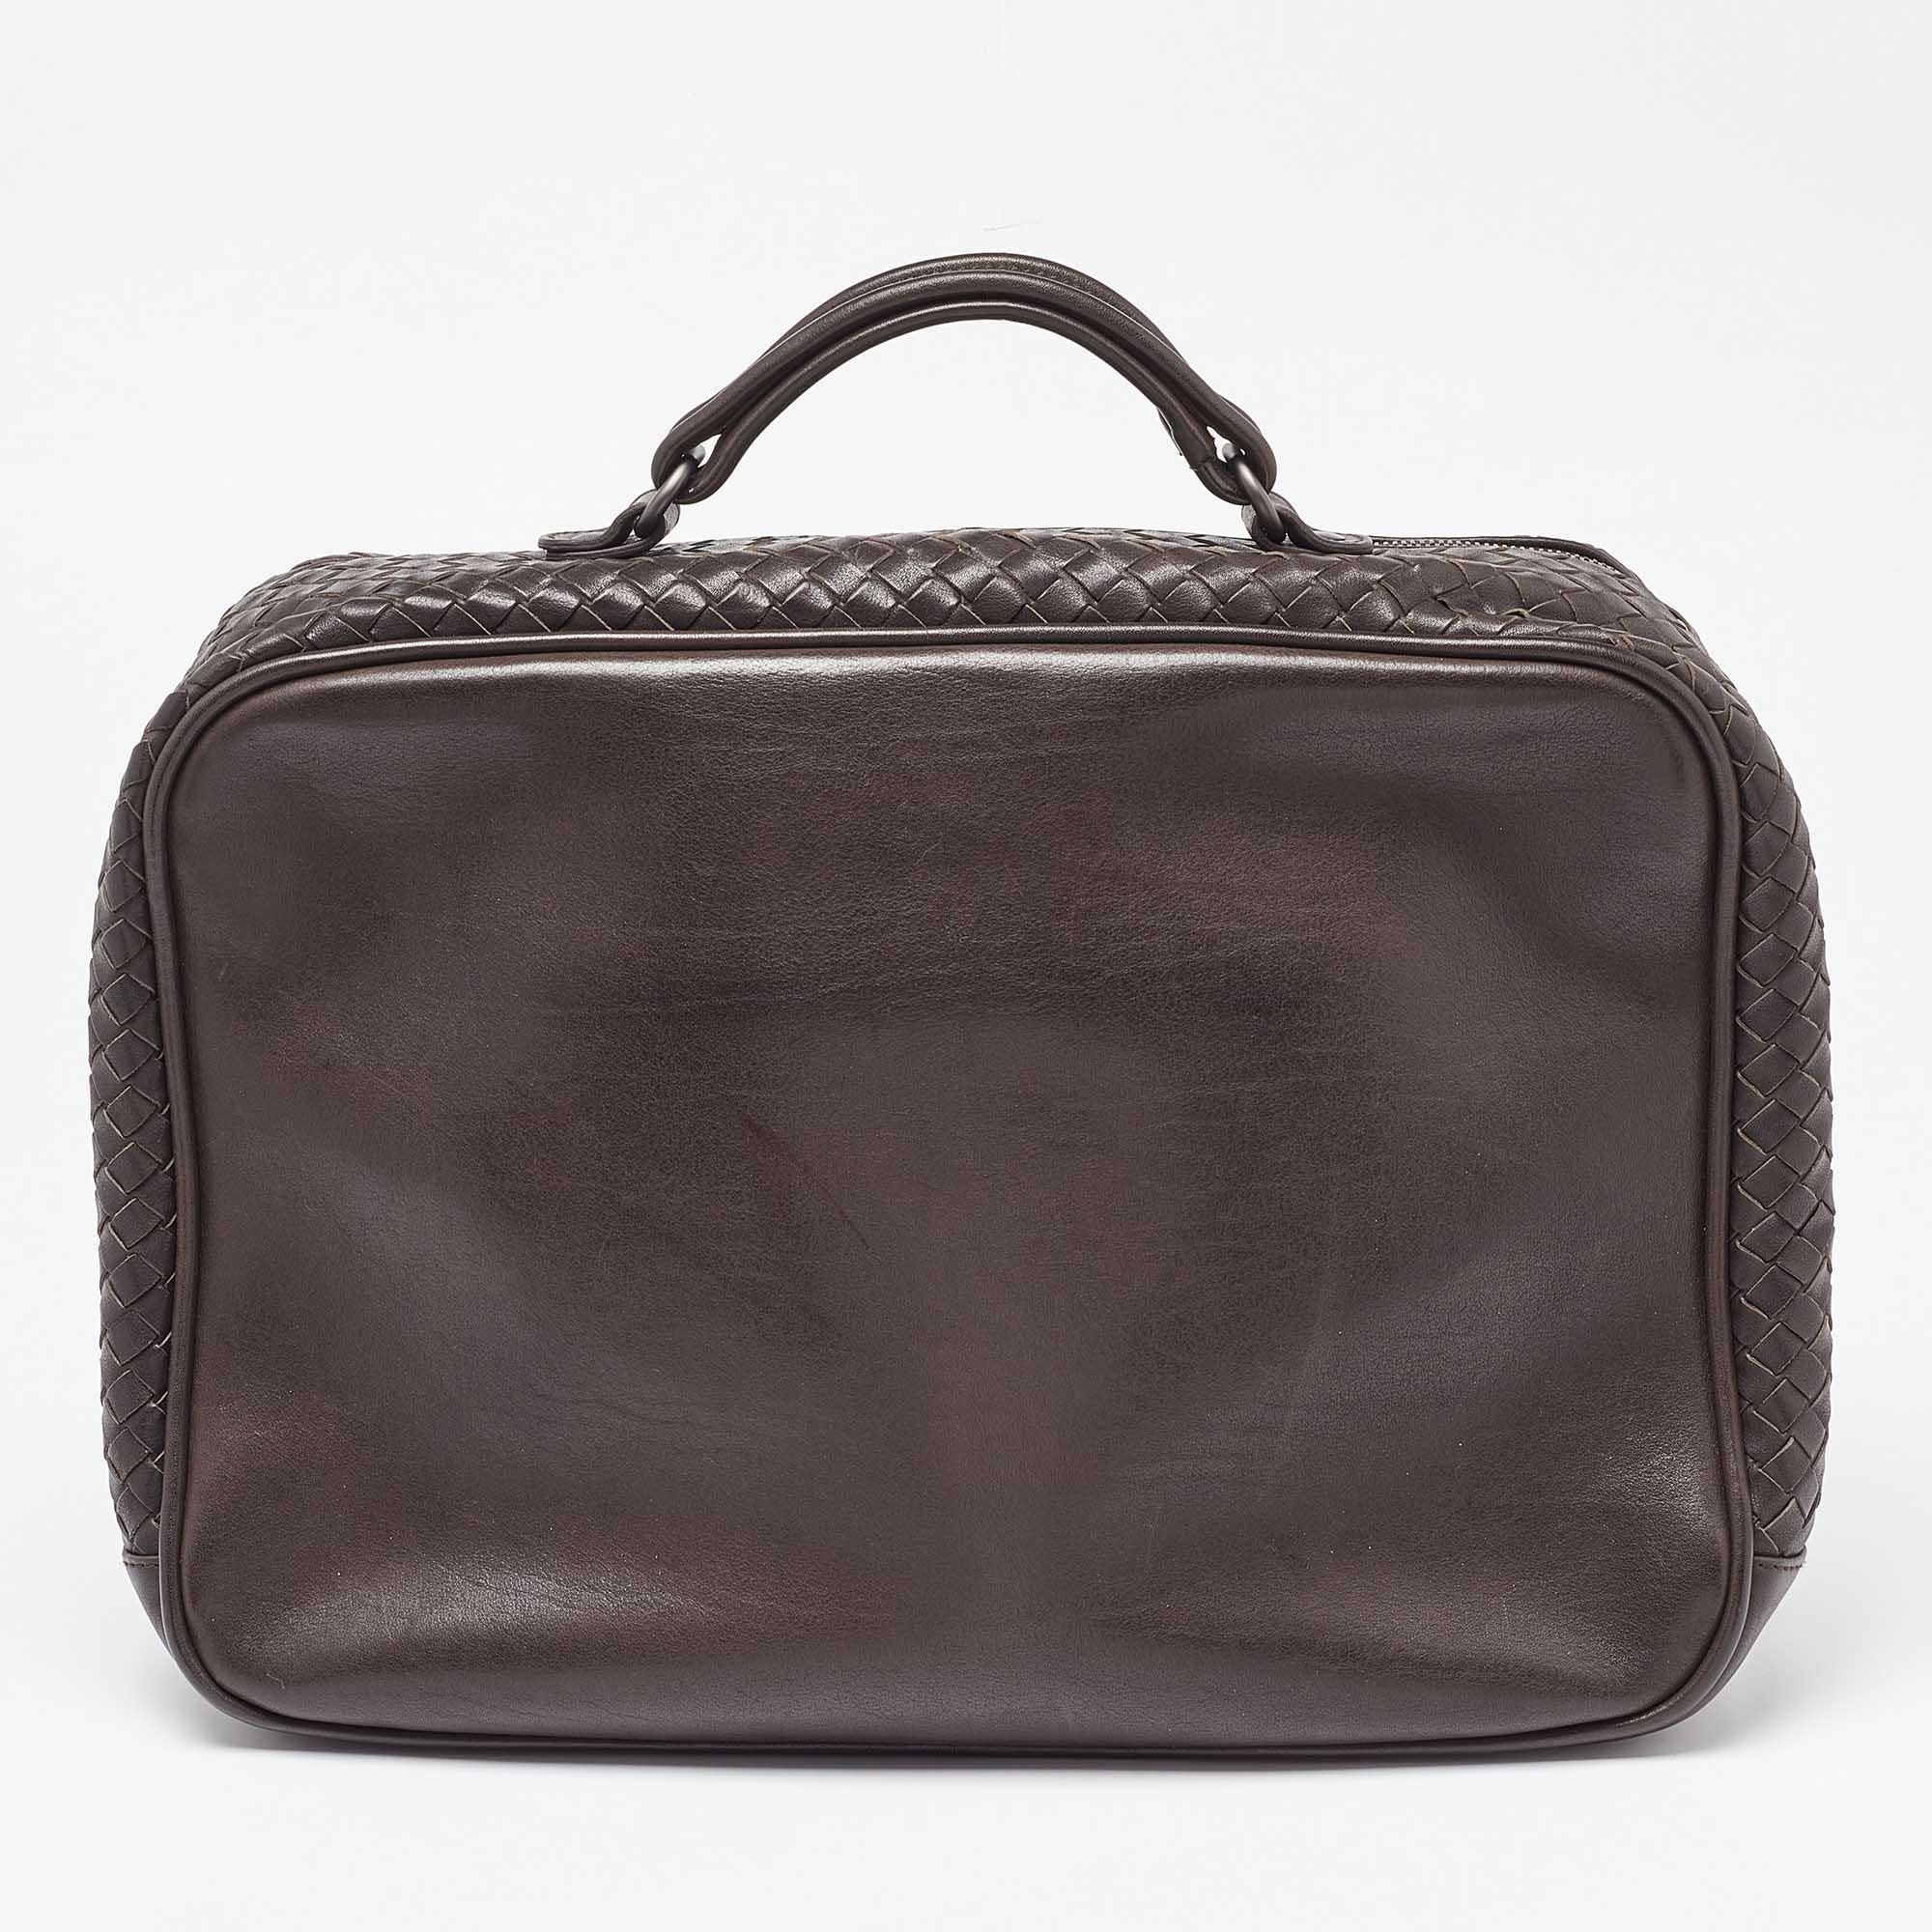 This Bottega Veneta briefcase brings such a fantastic shape that you're sure to look fashionable whenever you carry it. It has been crafted from brown leather and elevated with its signature Intrecciato touch.

Includes: Original Dustbag

